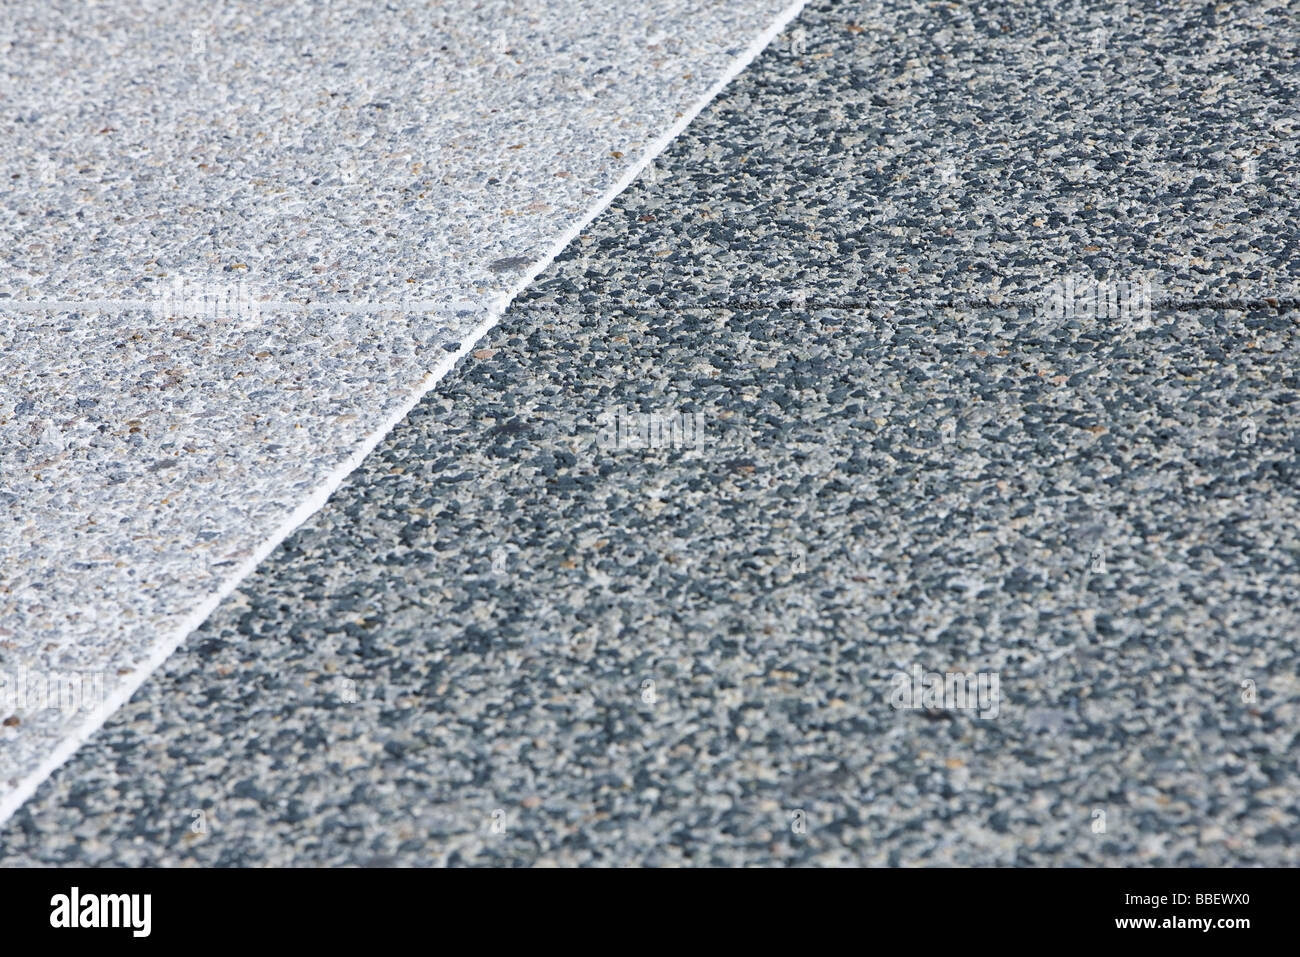 Aggregate background Stock Photo